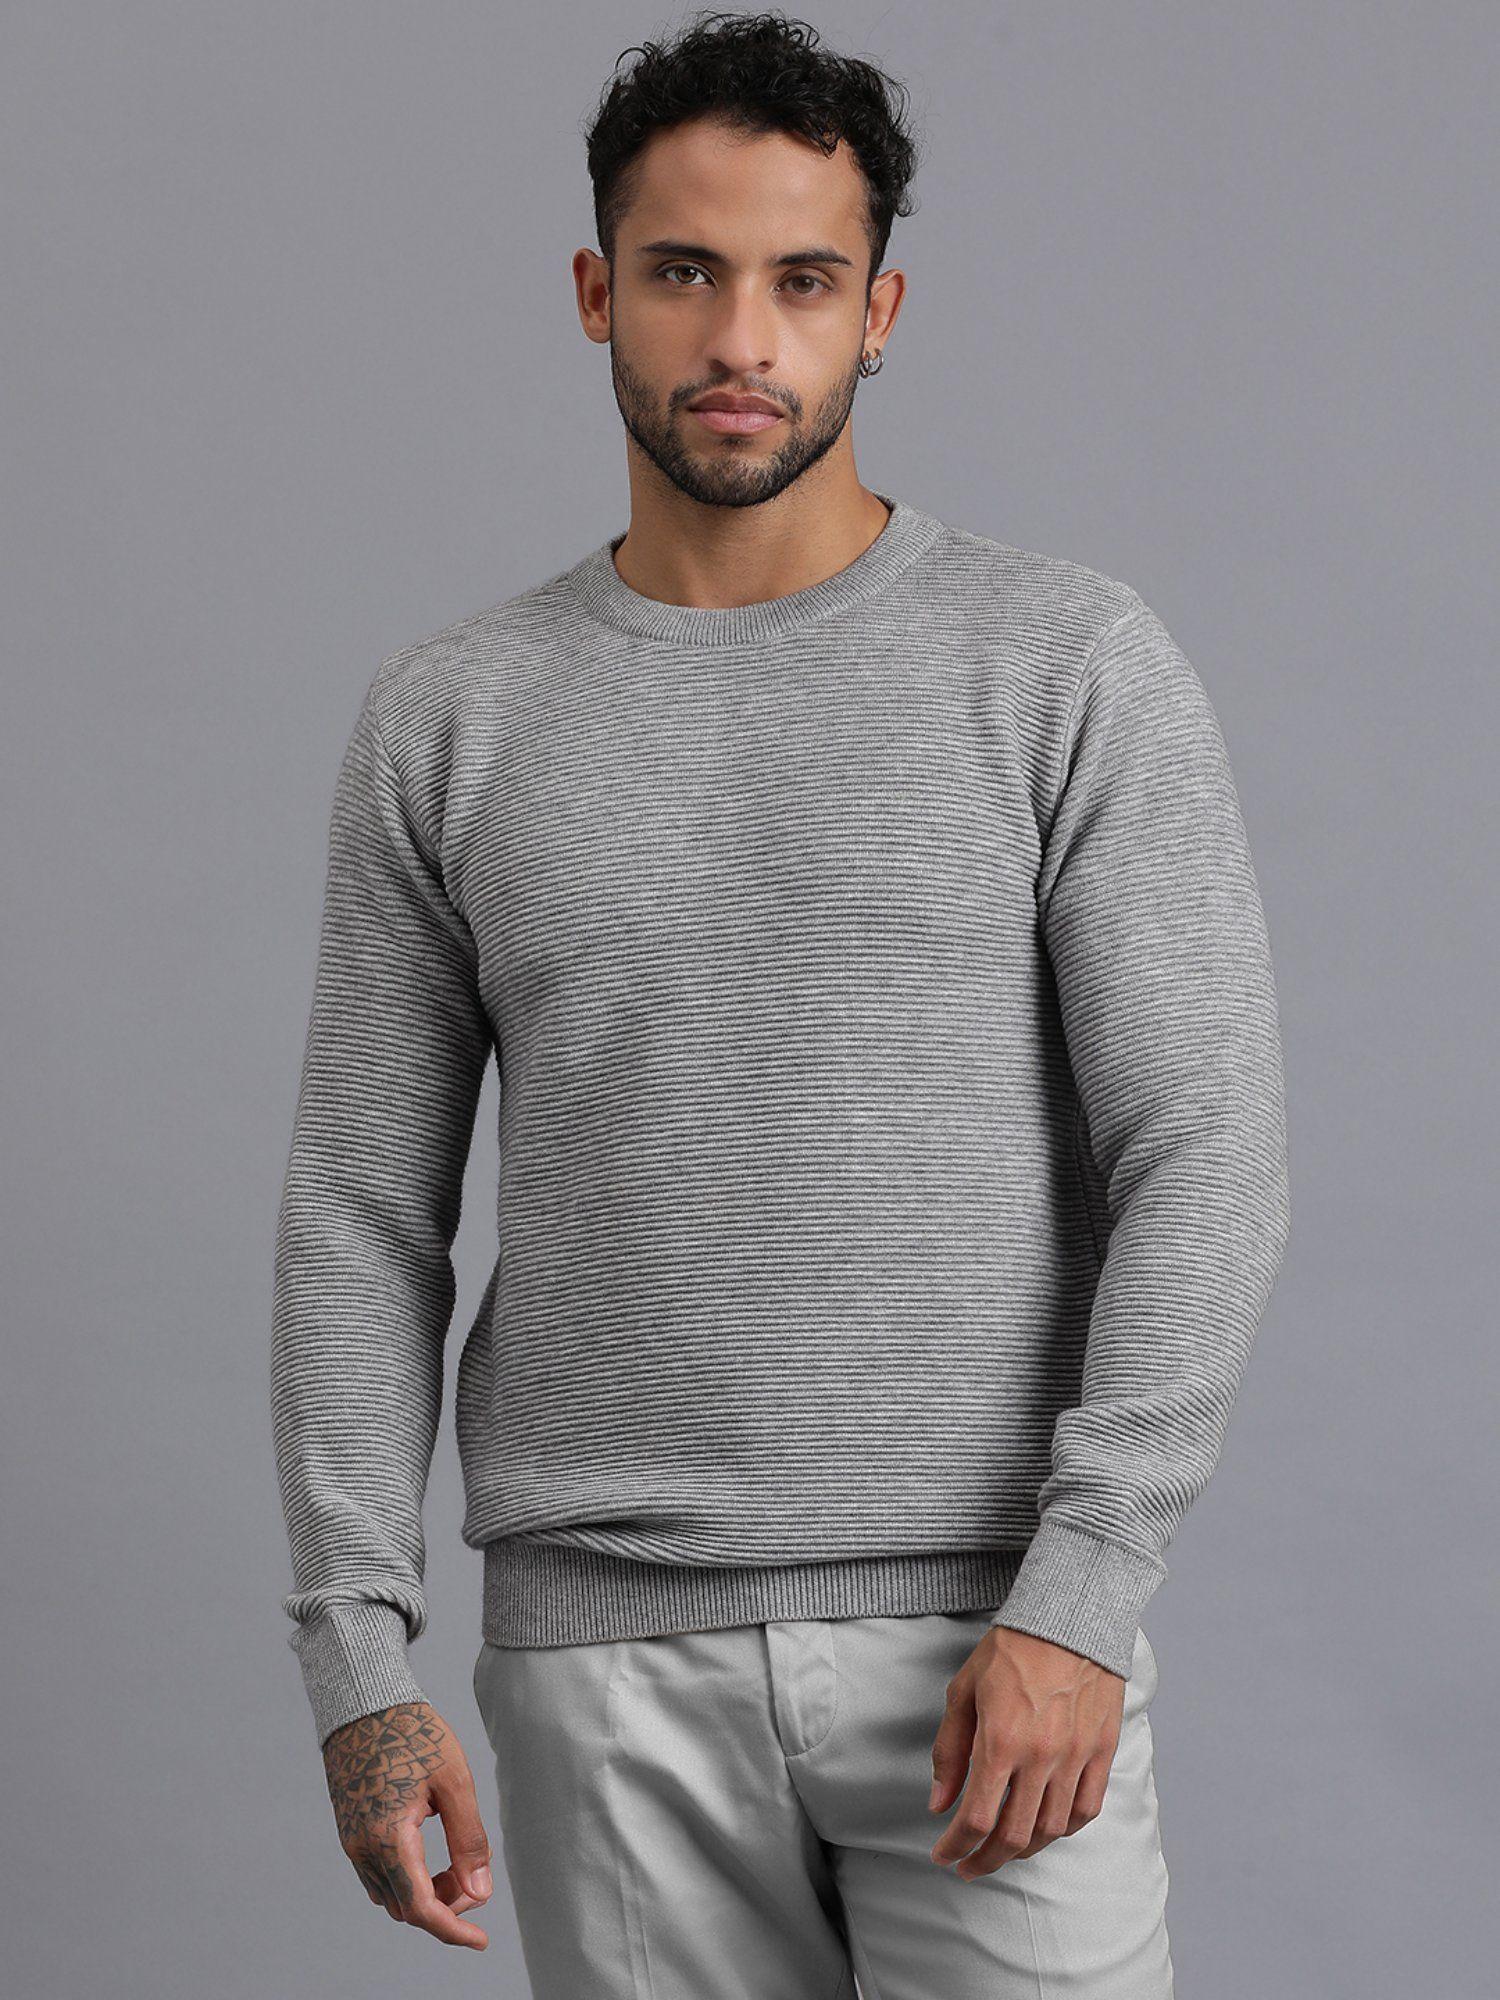 grey luxury lateral designer knitted mens wool pullover sweater